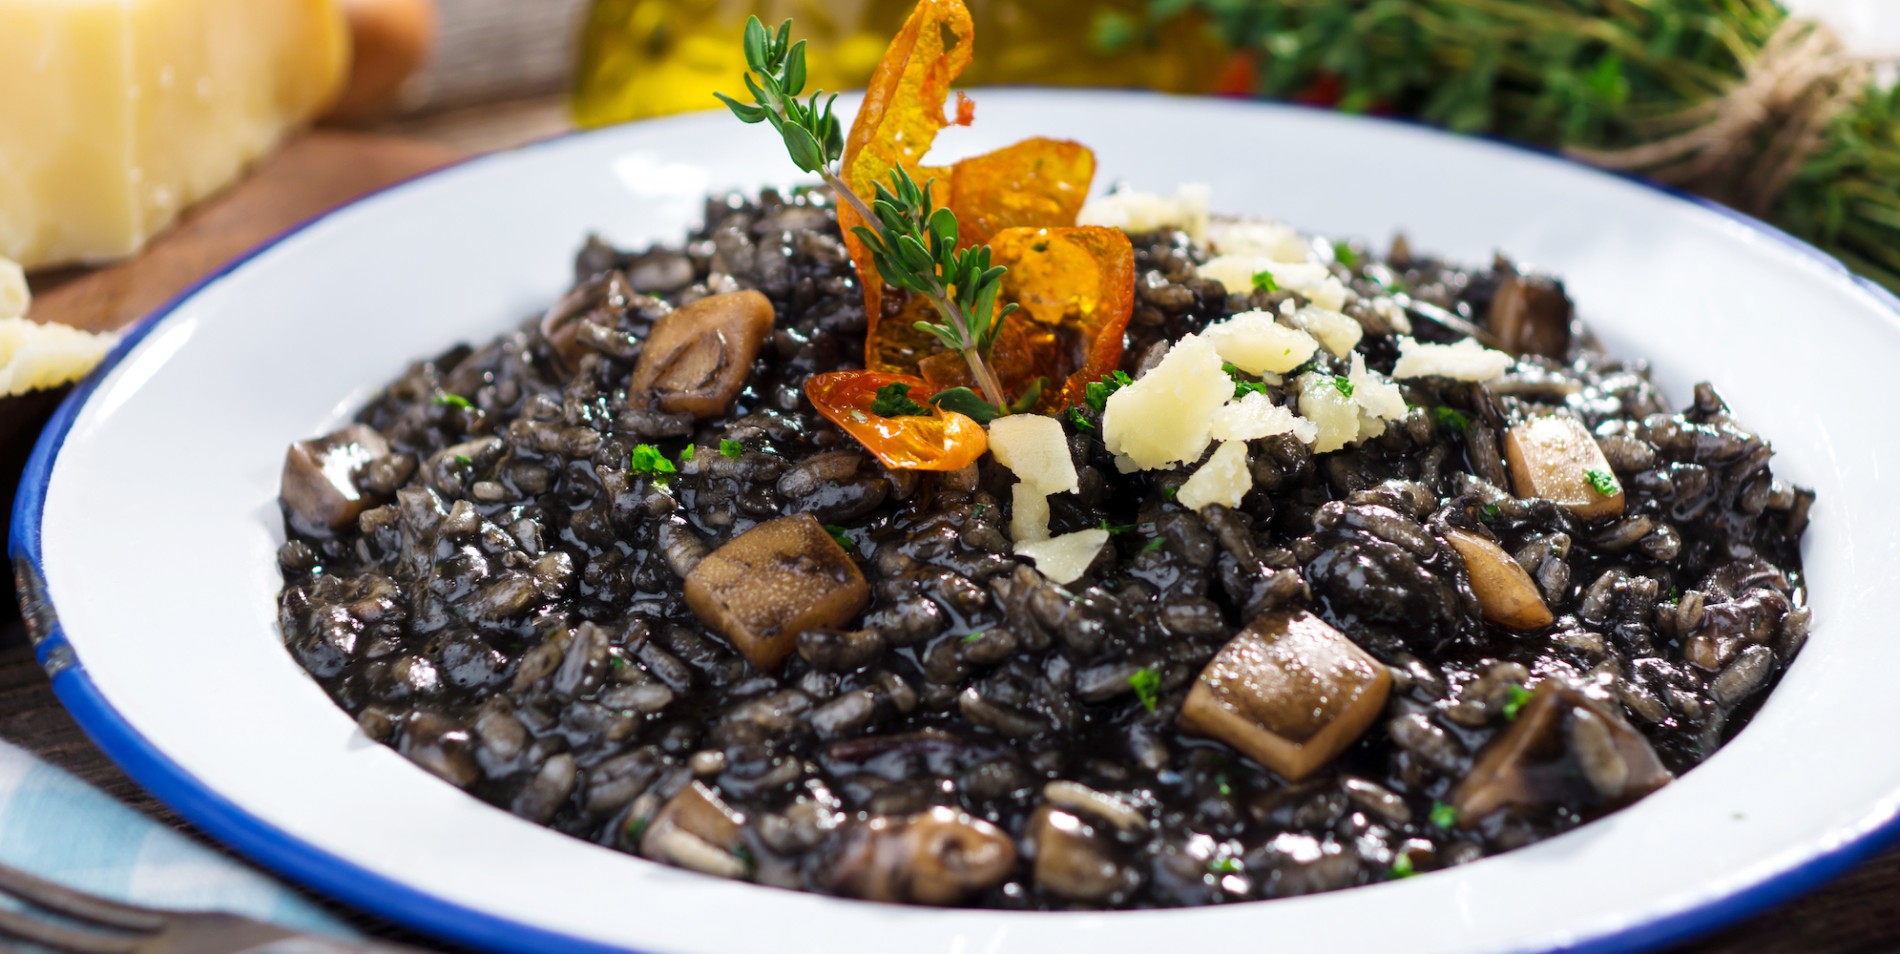 Squid ink black risotto topped with an orange leaf on a white plate